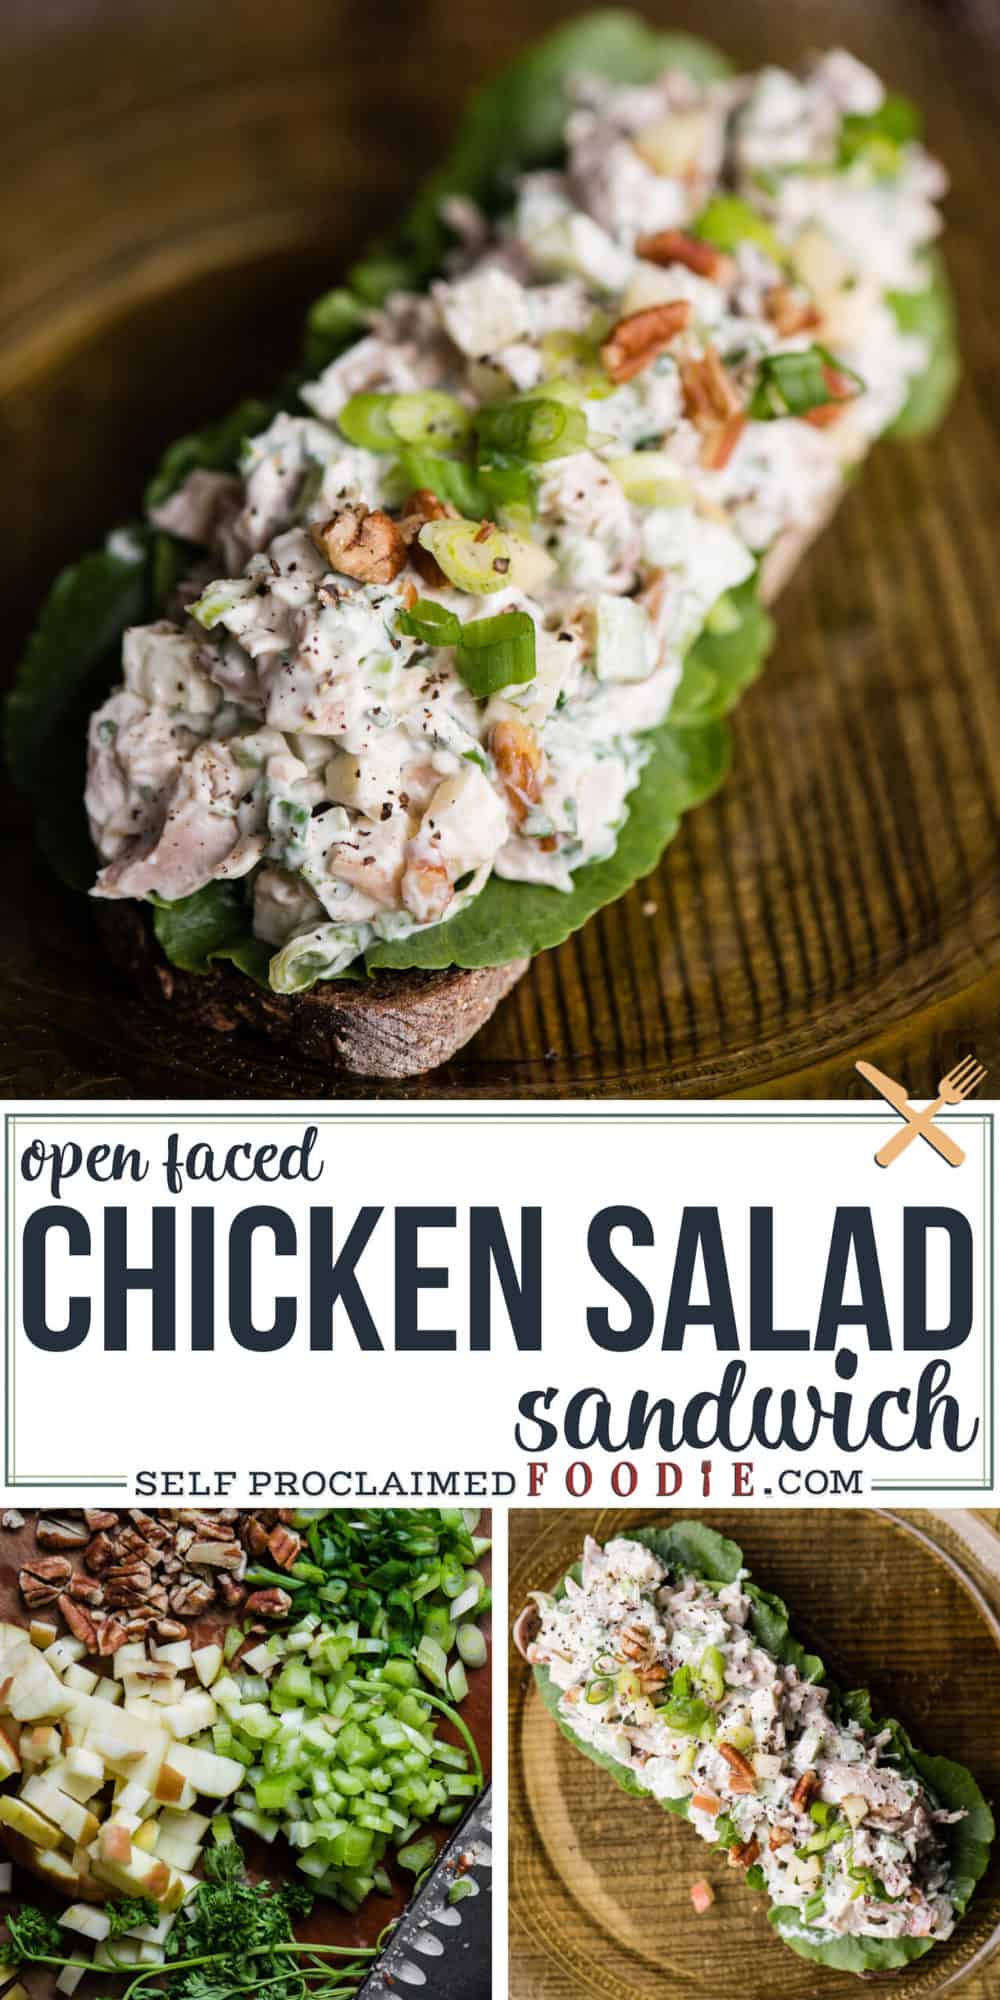 Open-faced Chicken Salad Sandwich - Self Proclaimed Foodie